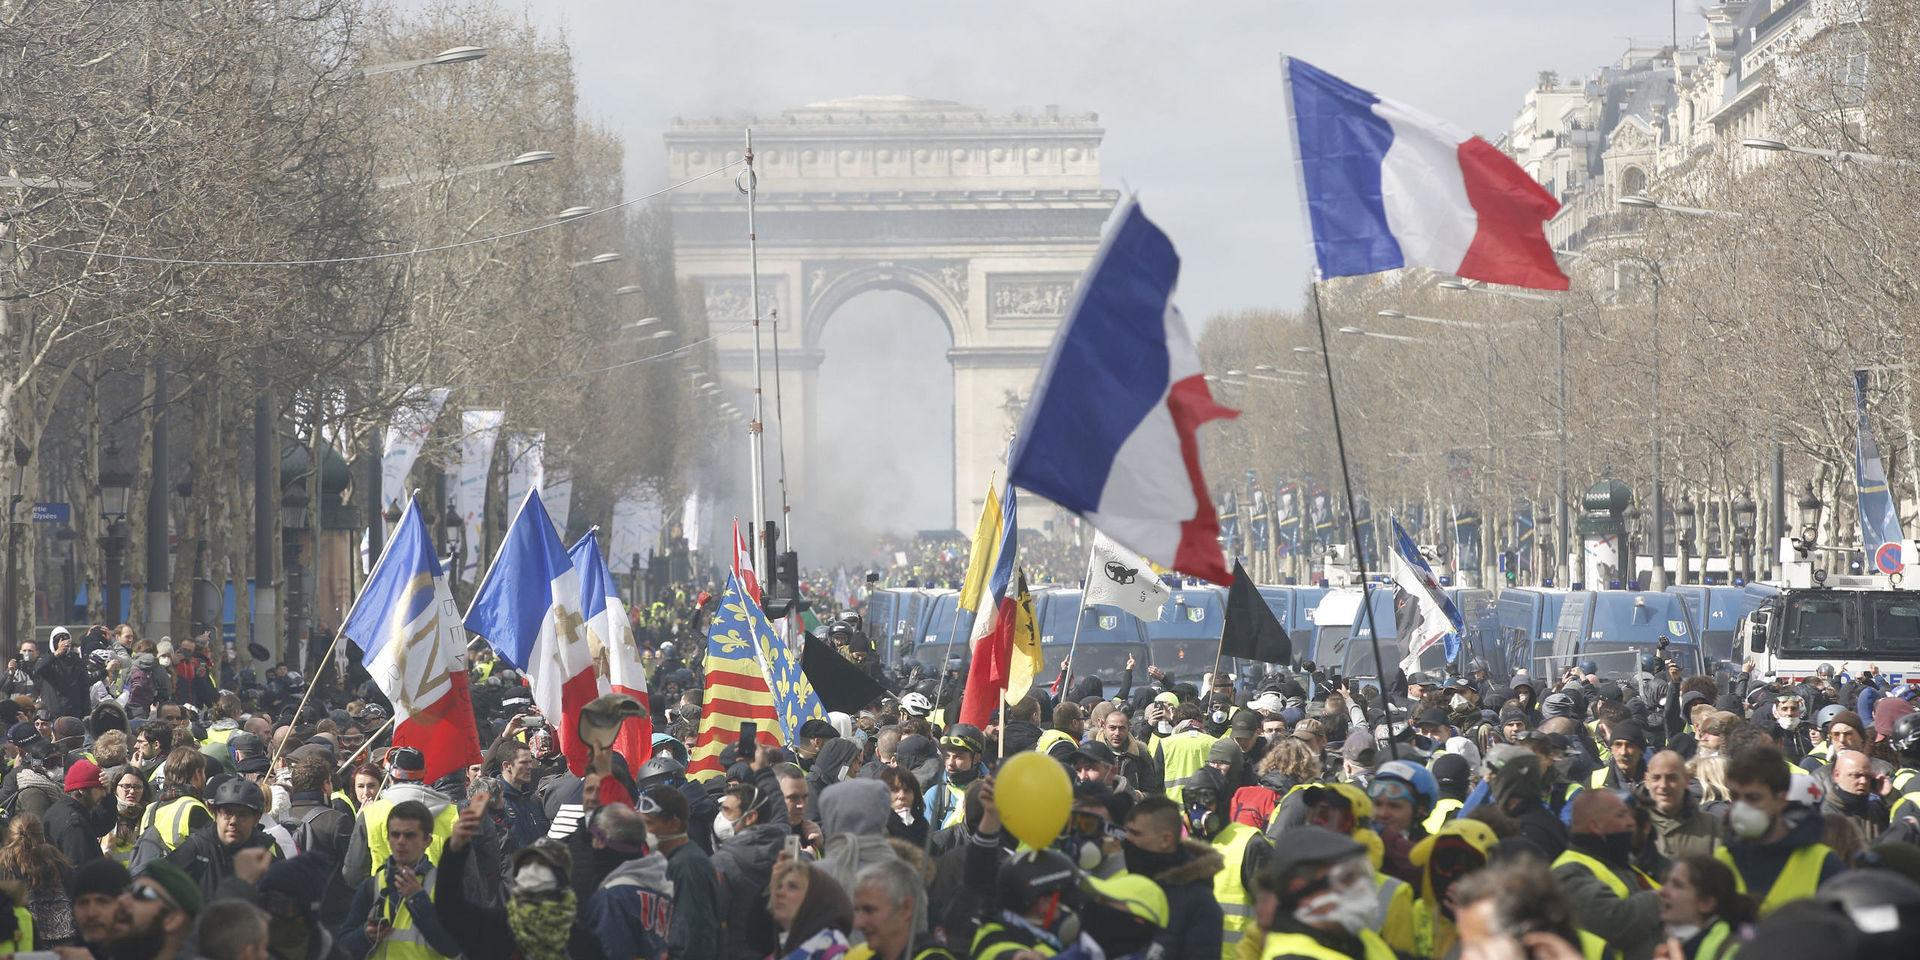 Yellow vests demonstrators invade the Champs Elysees avenue Saturday, March 16, 2019 in Paris. French yellow vest protesters clashed Saturday with riot police near the Arc de Triomphe as they kicked off their 18th straight weekend of demonstrations against President Emmanuel Macron. (AP Photo/Christophe Ena)